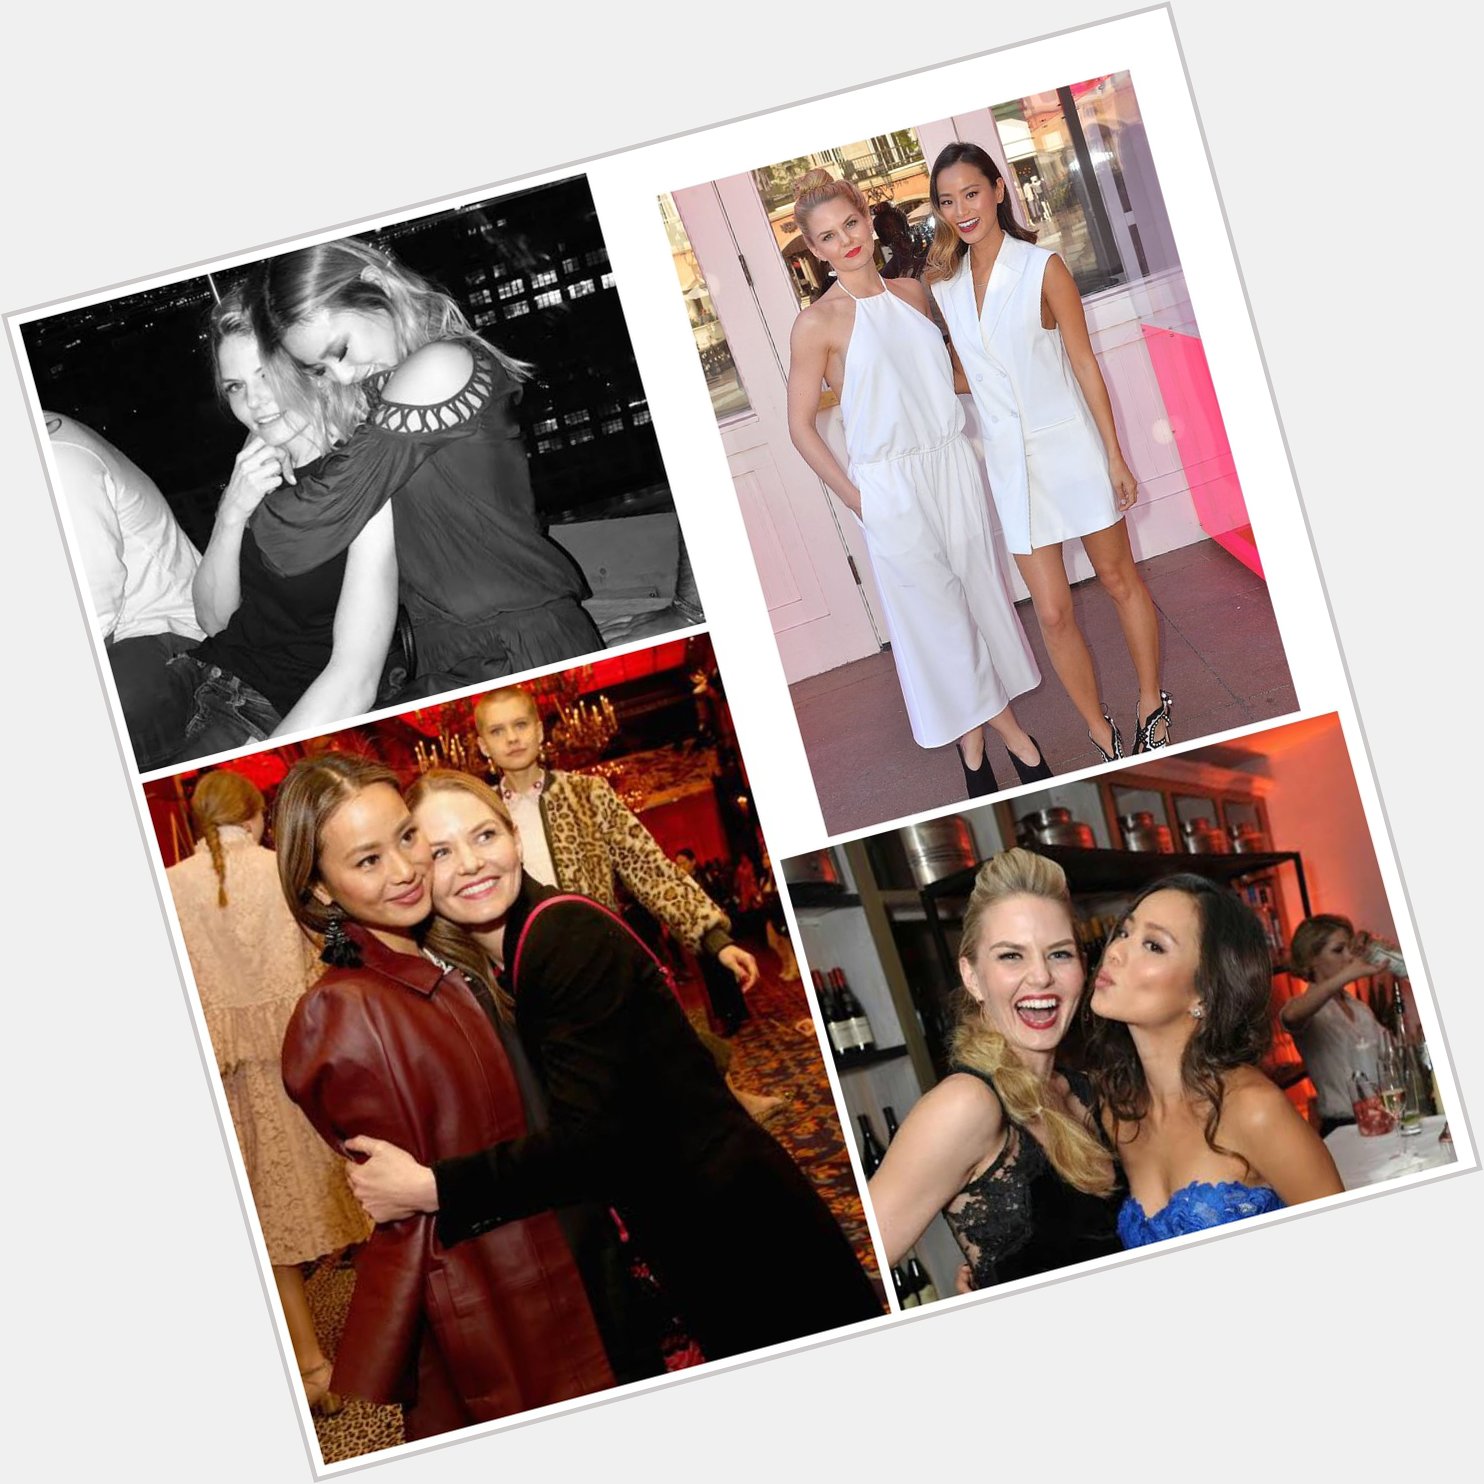 We want to wish a very very happy bday!  Jennifer Morrison and Jamie Chung 